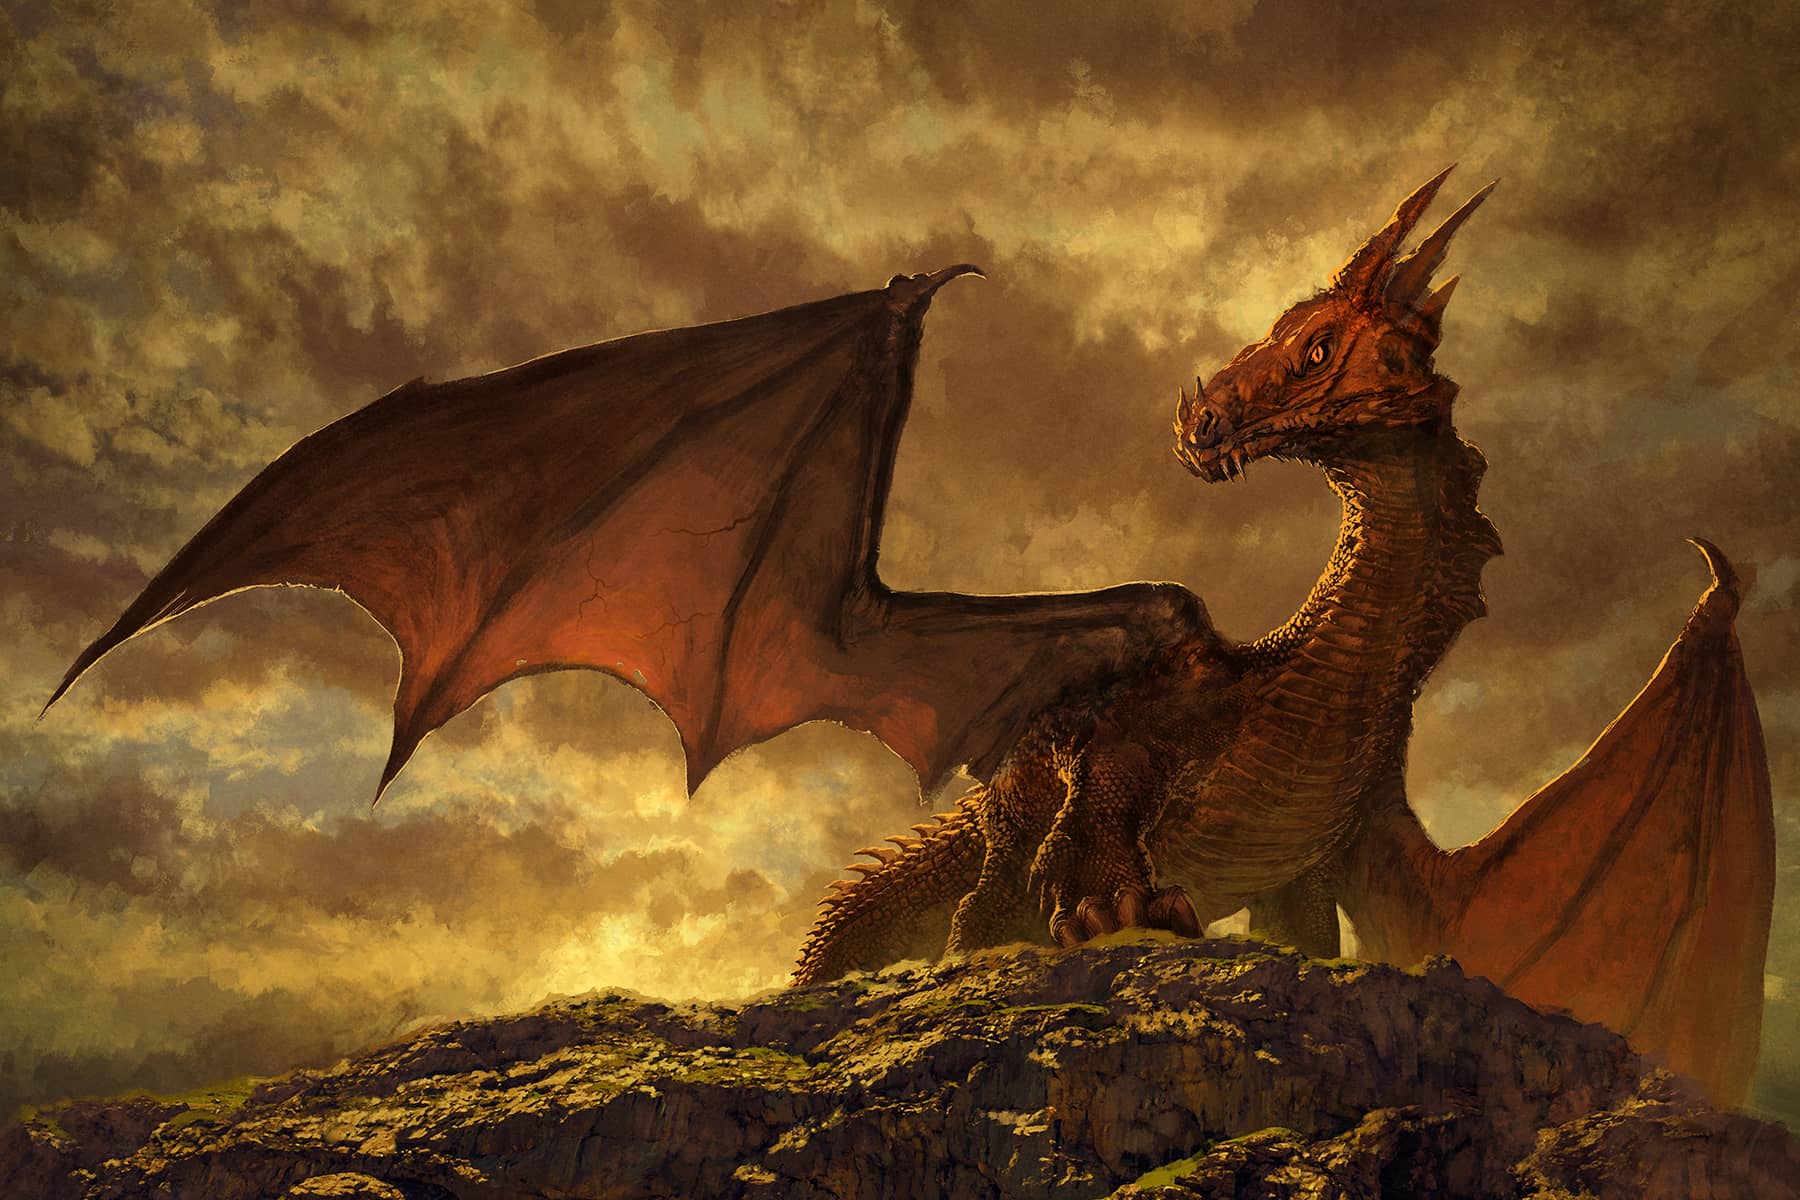 Game of Thrones' Dragons: What They Eat, How They Fly, and More Info - Eater